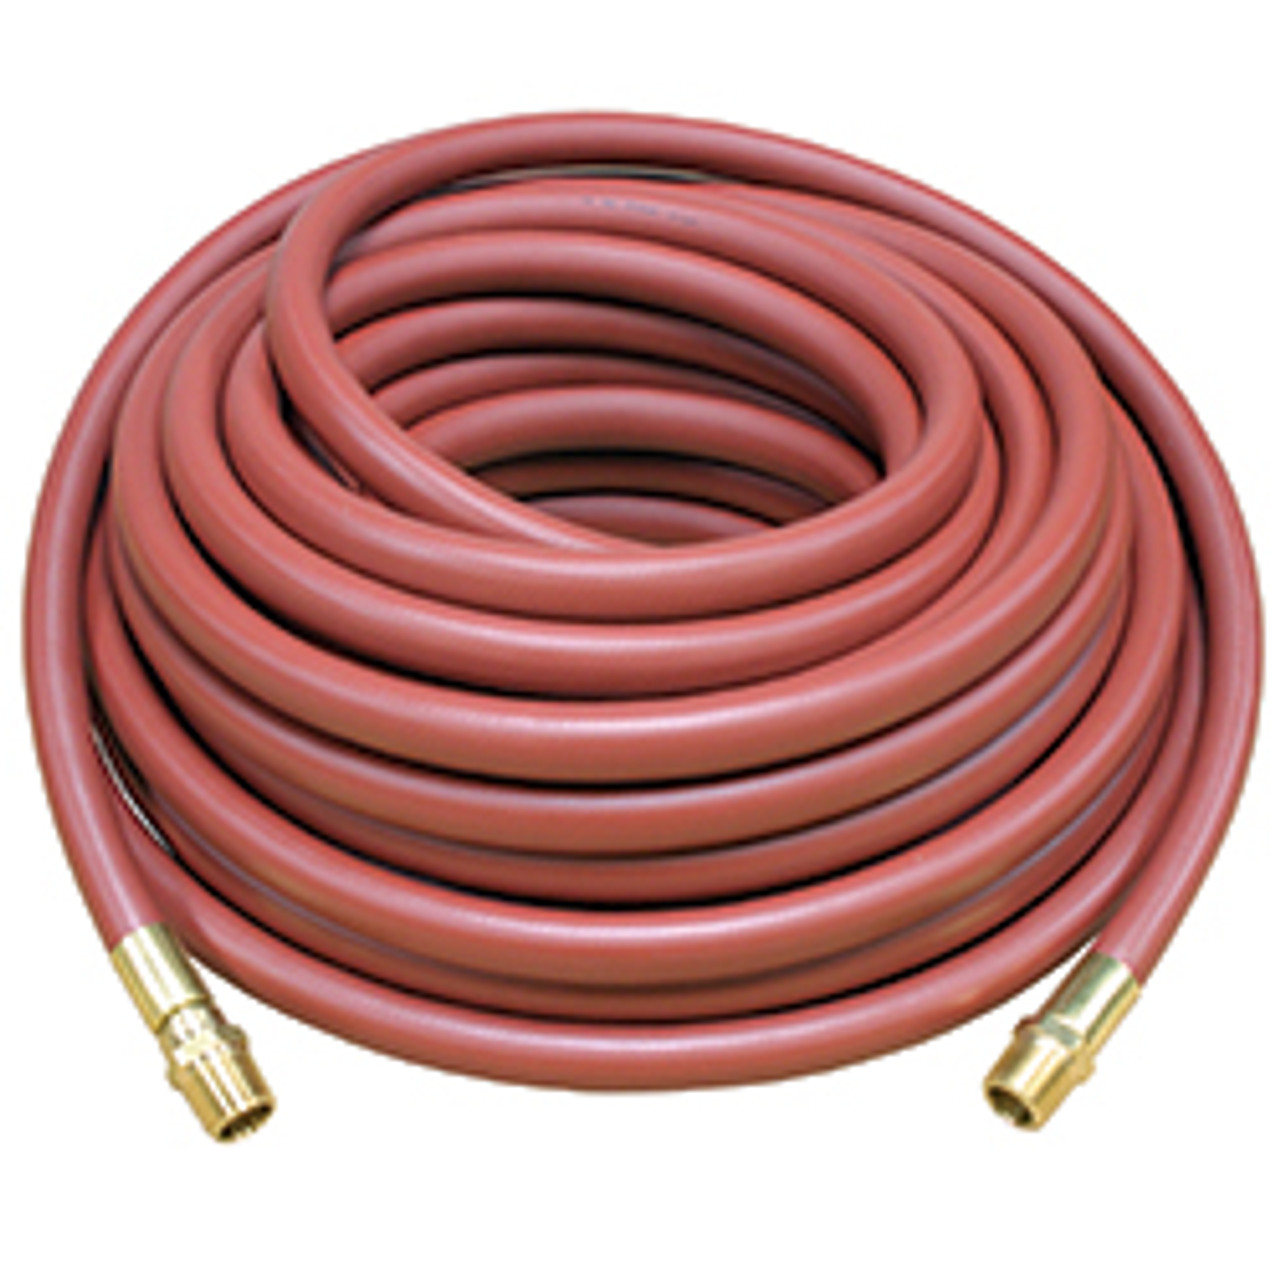 Buy a Reelcraft 601026-100 Air/Water Hose